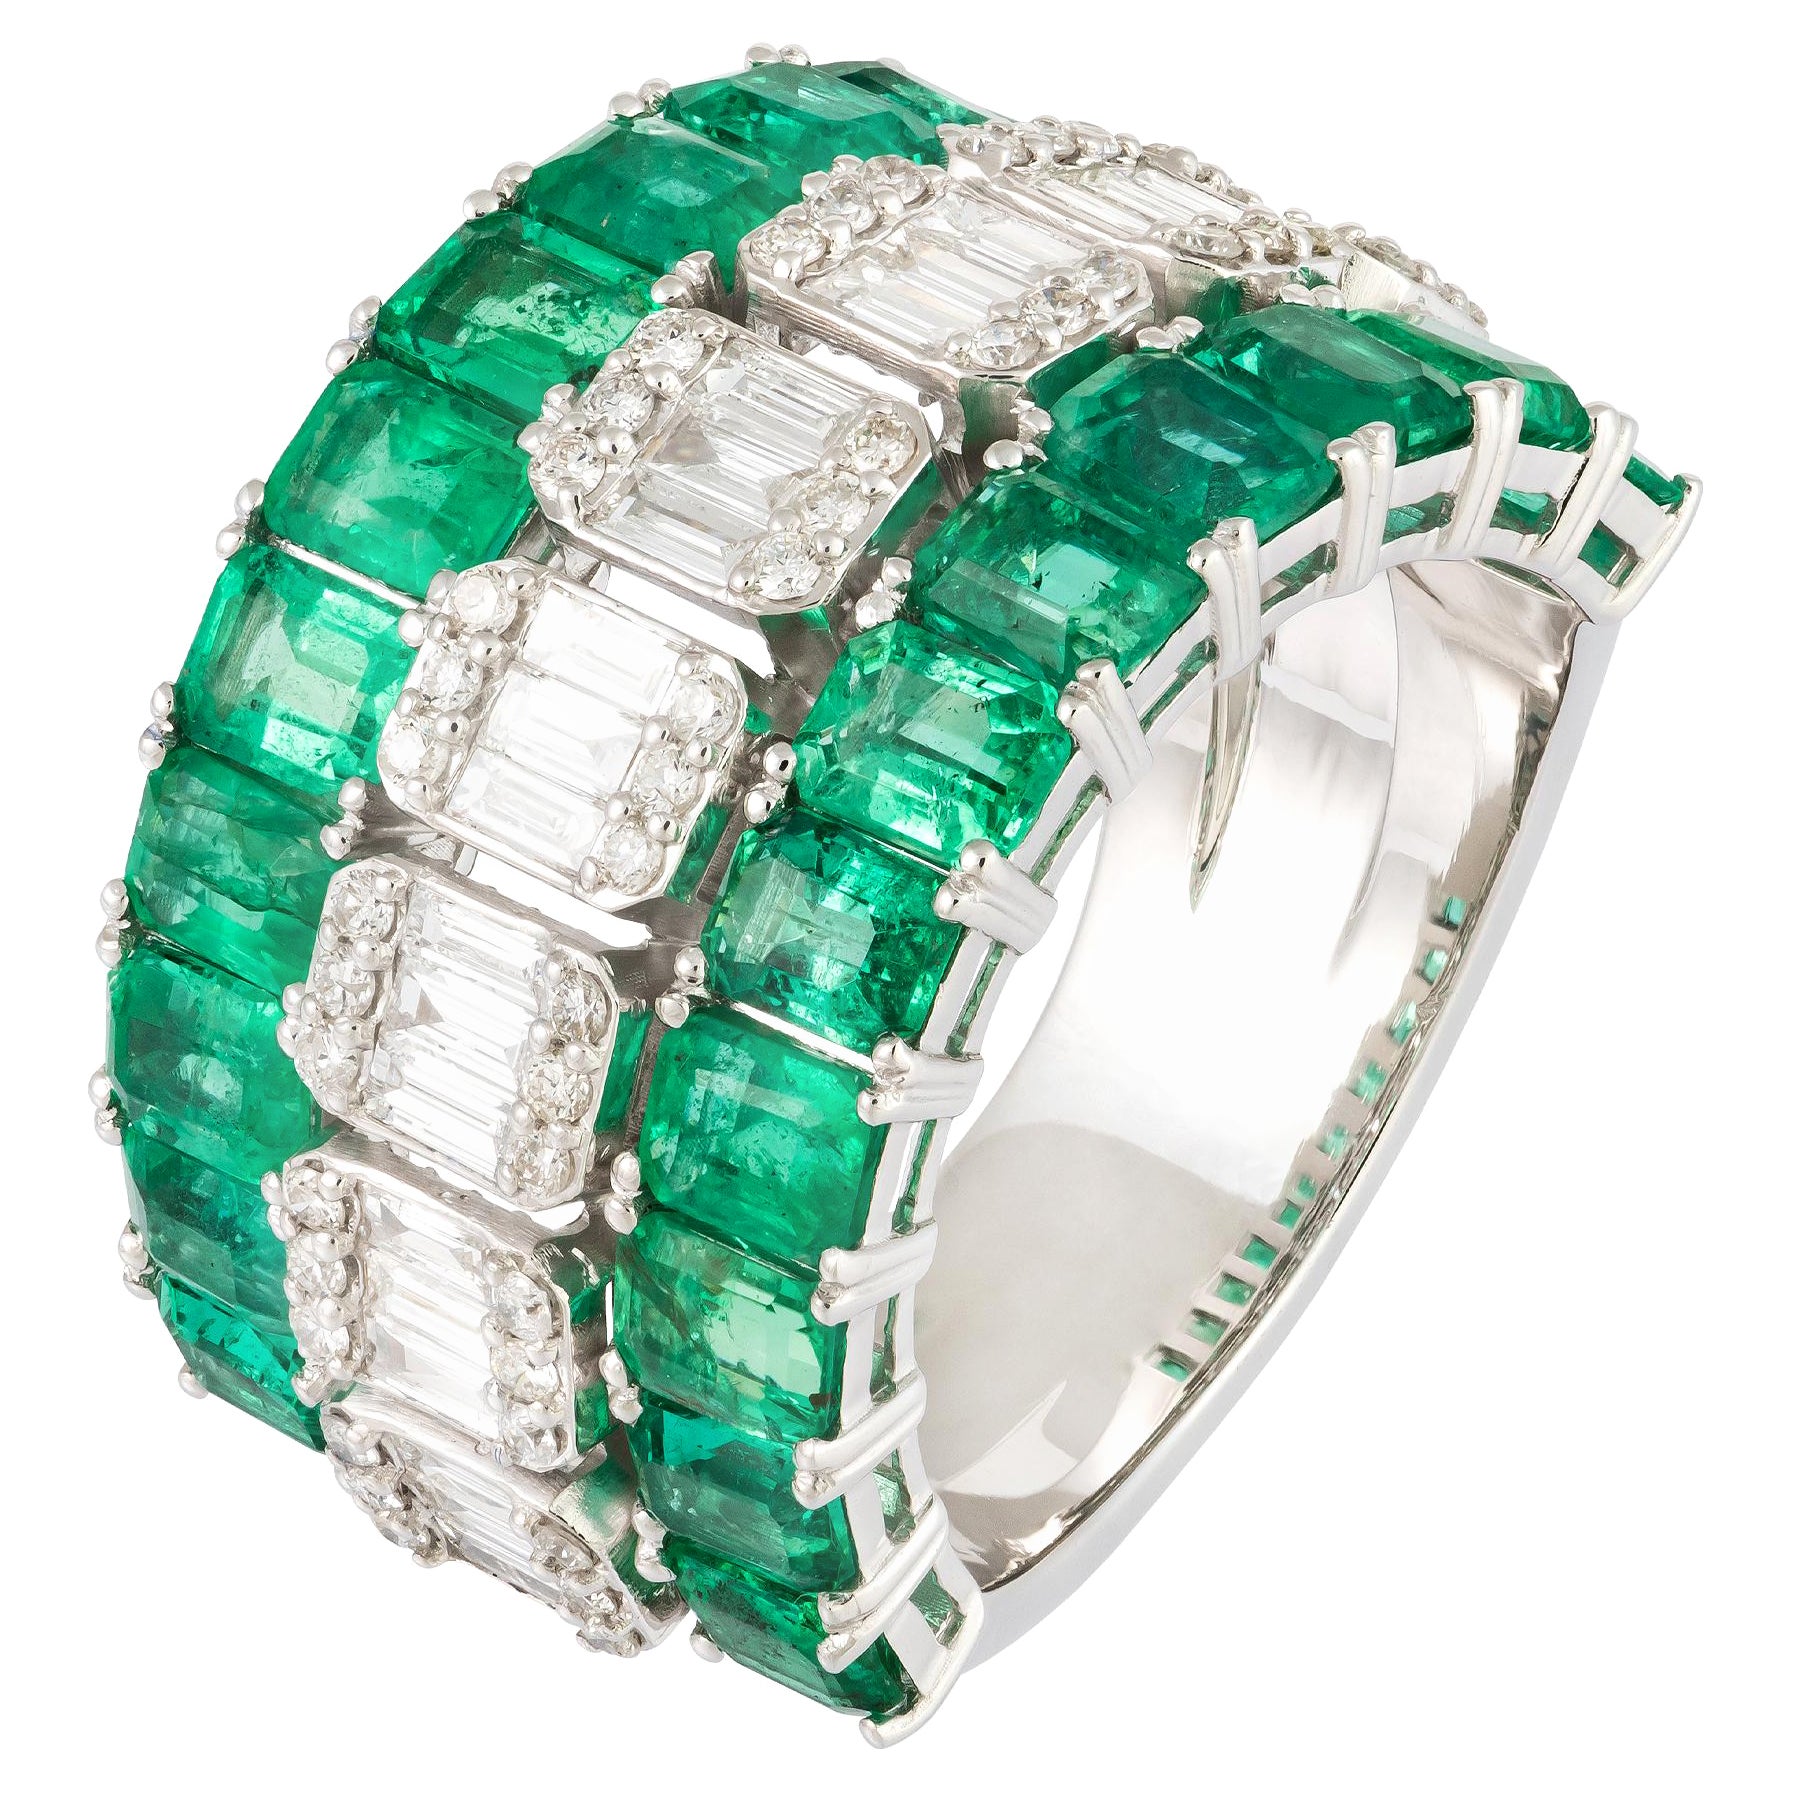 For Sale:  Statement Band Emerald White 18K Gold White Diamond Ring for Her